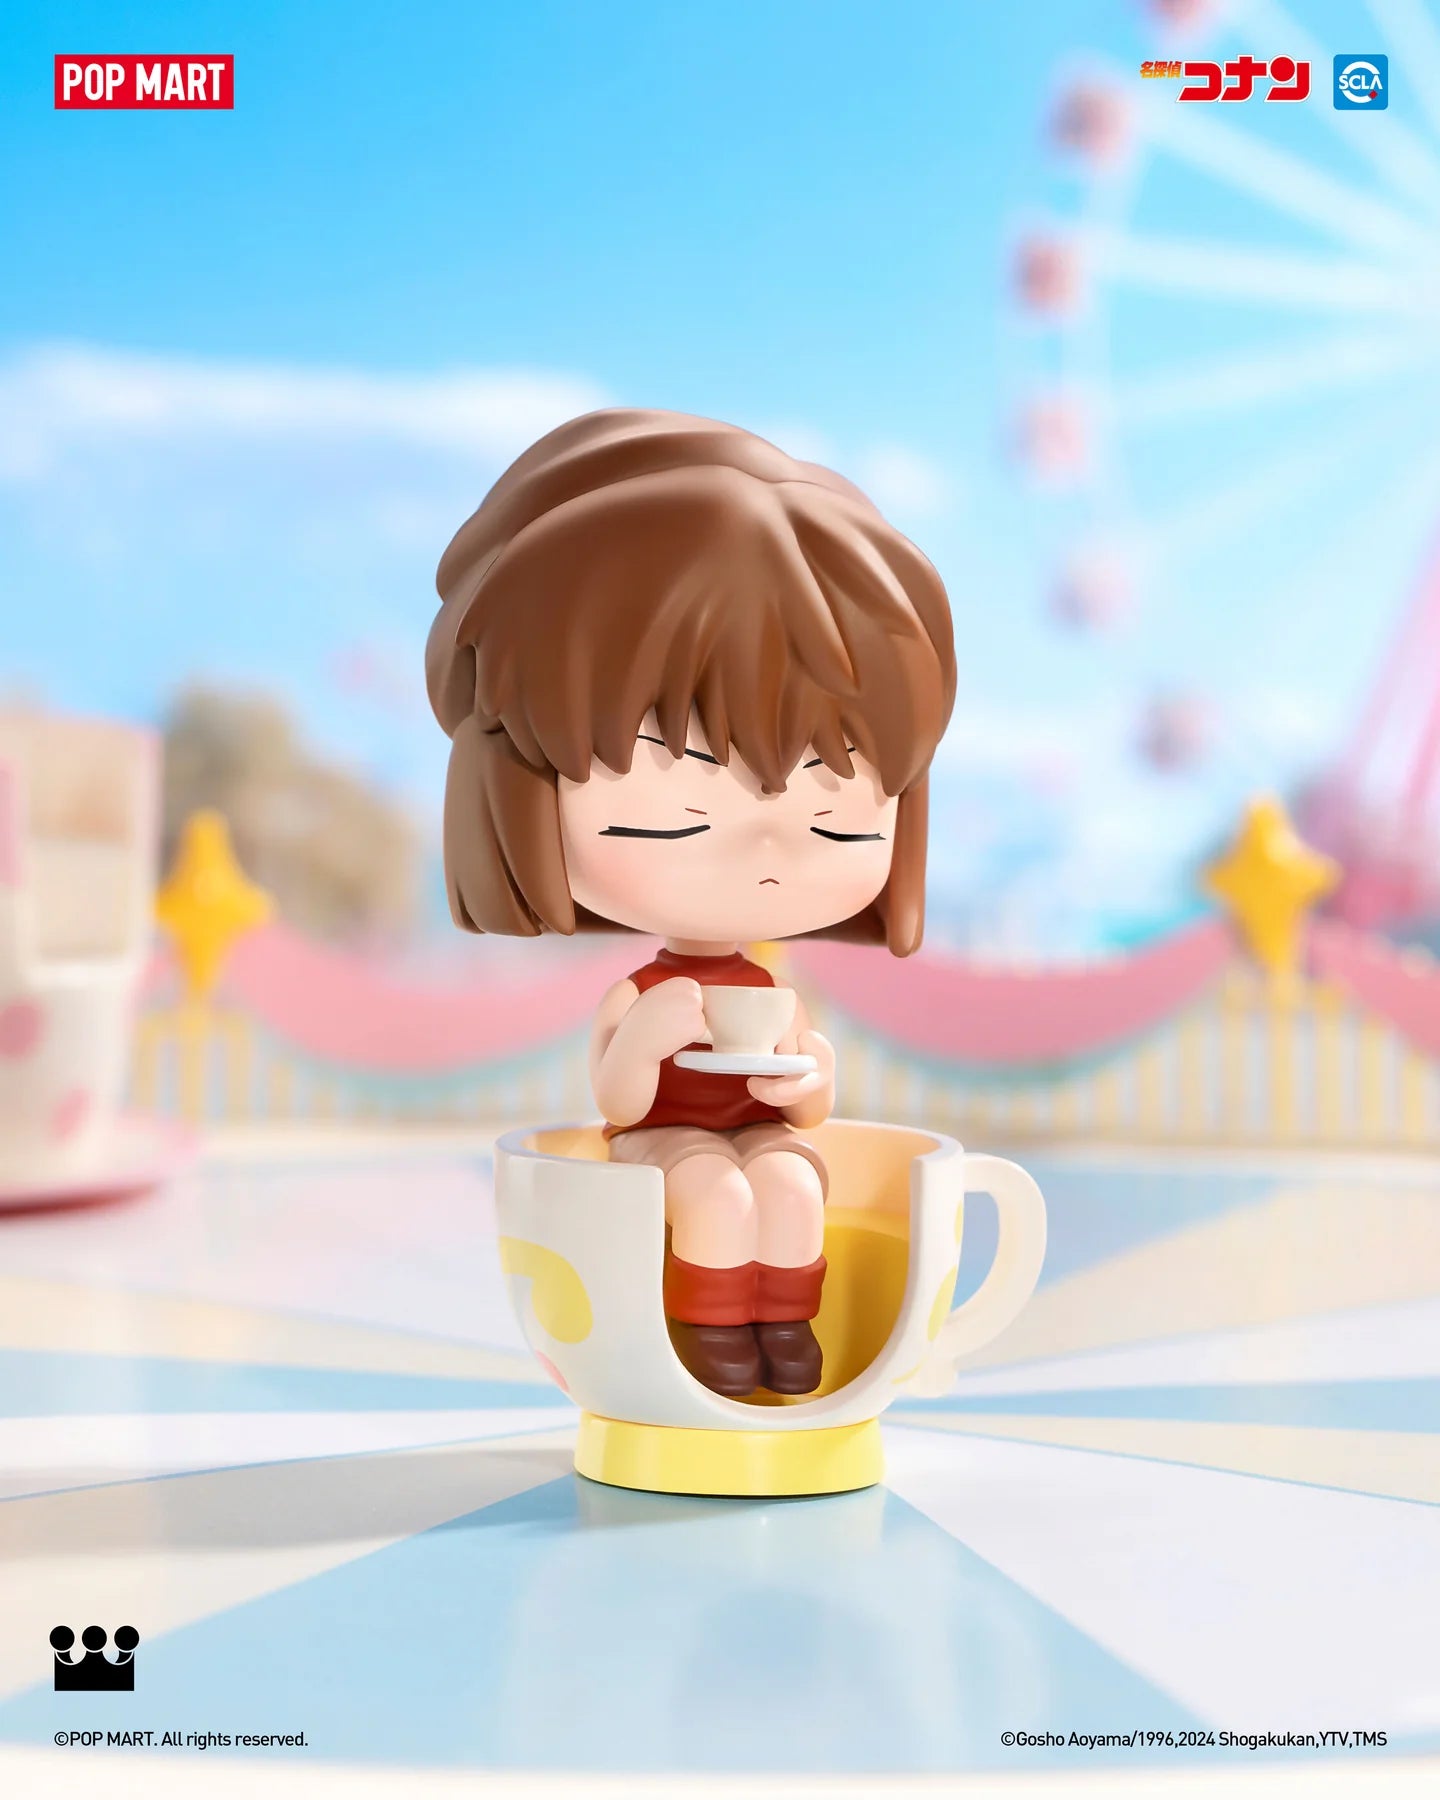 Detective Conan Carnival Blind Box Series: a cartoon figurine of a girl sitting in a teacup, part of a toy collection.